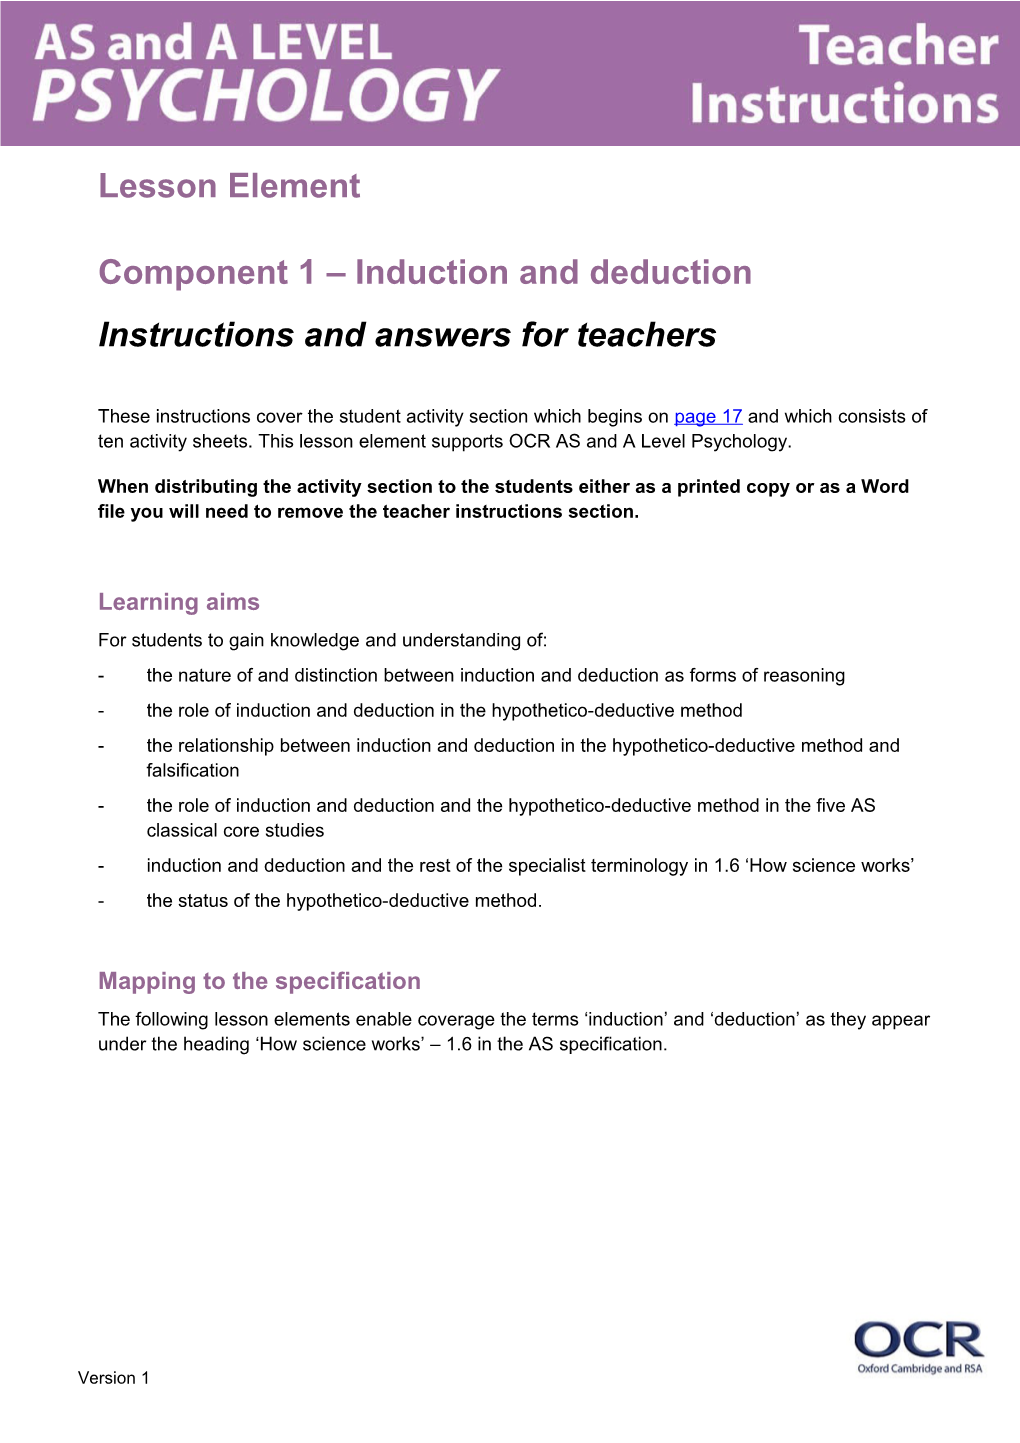 OCR AS and a Level Psychology Lesson Element - Induction and Deduction